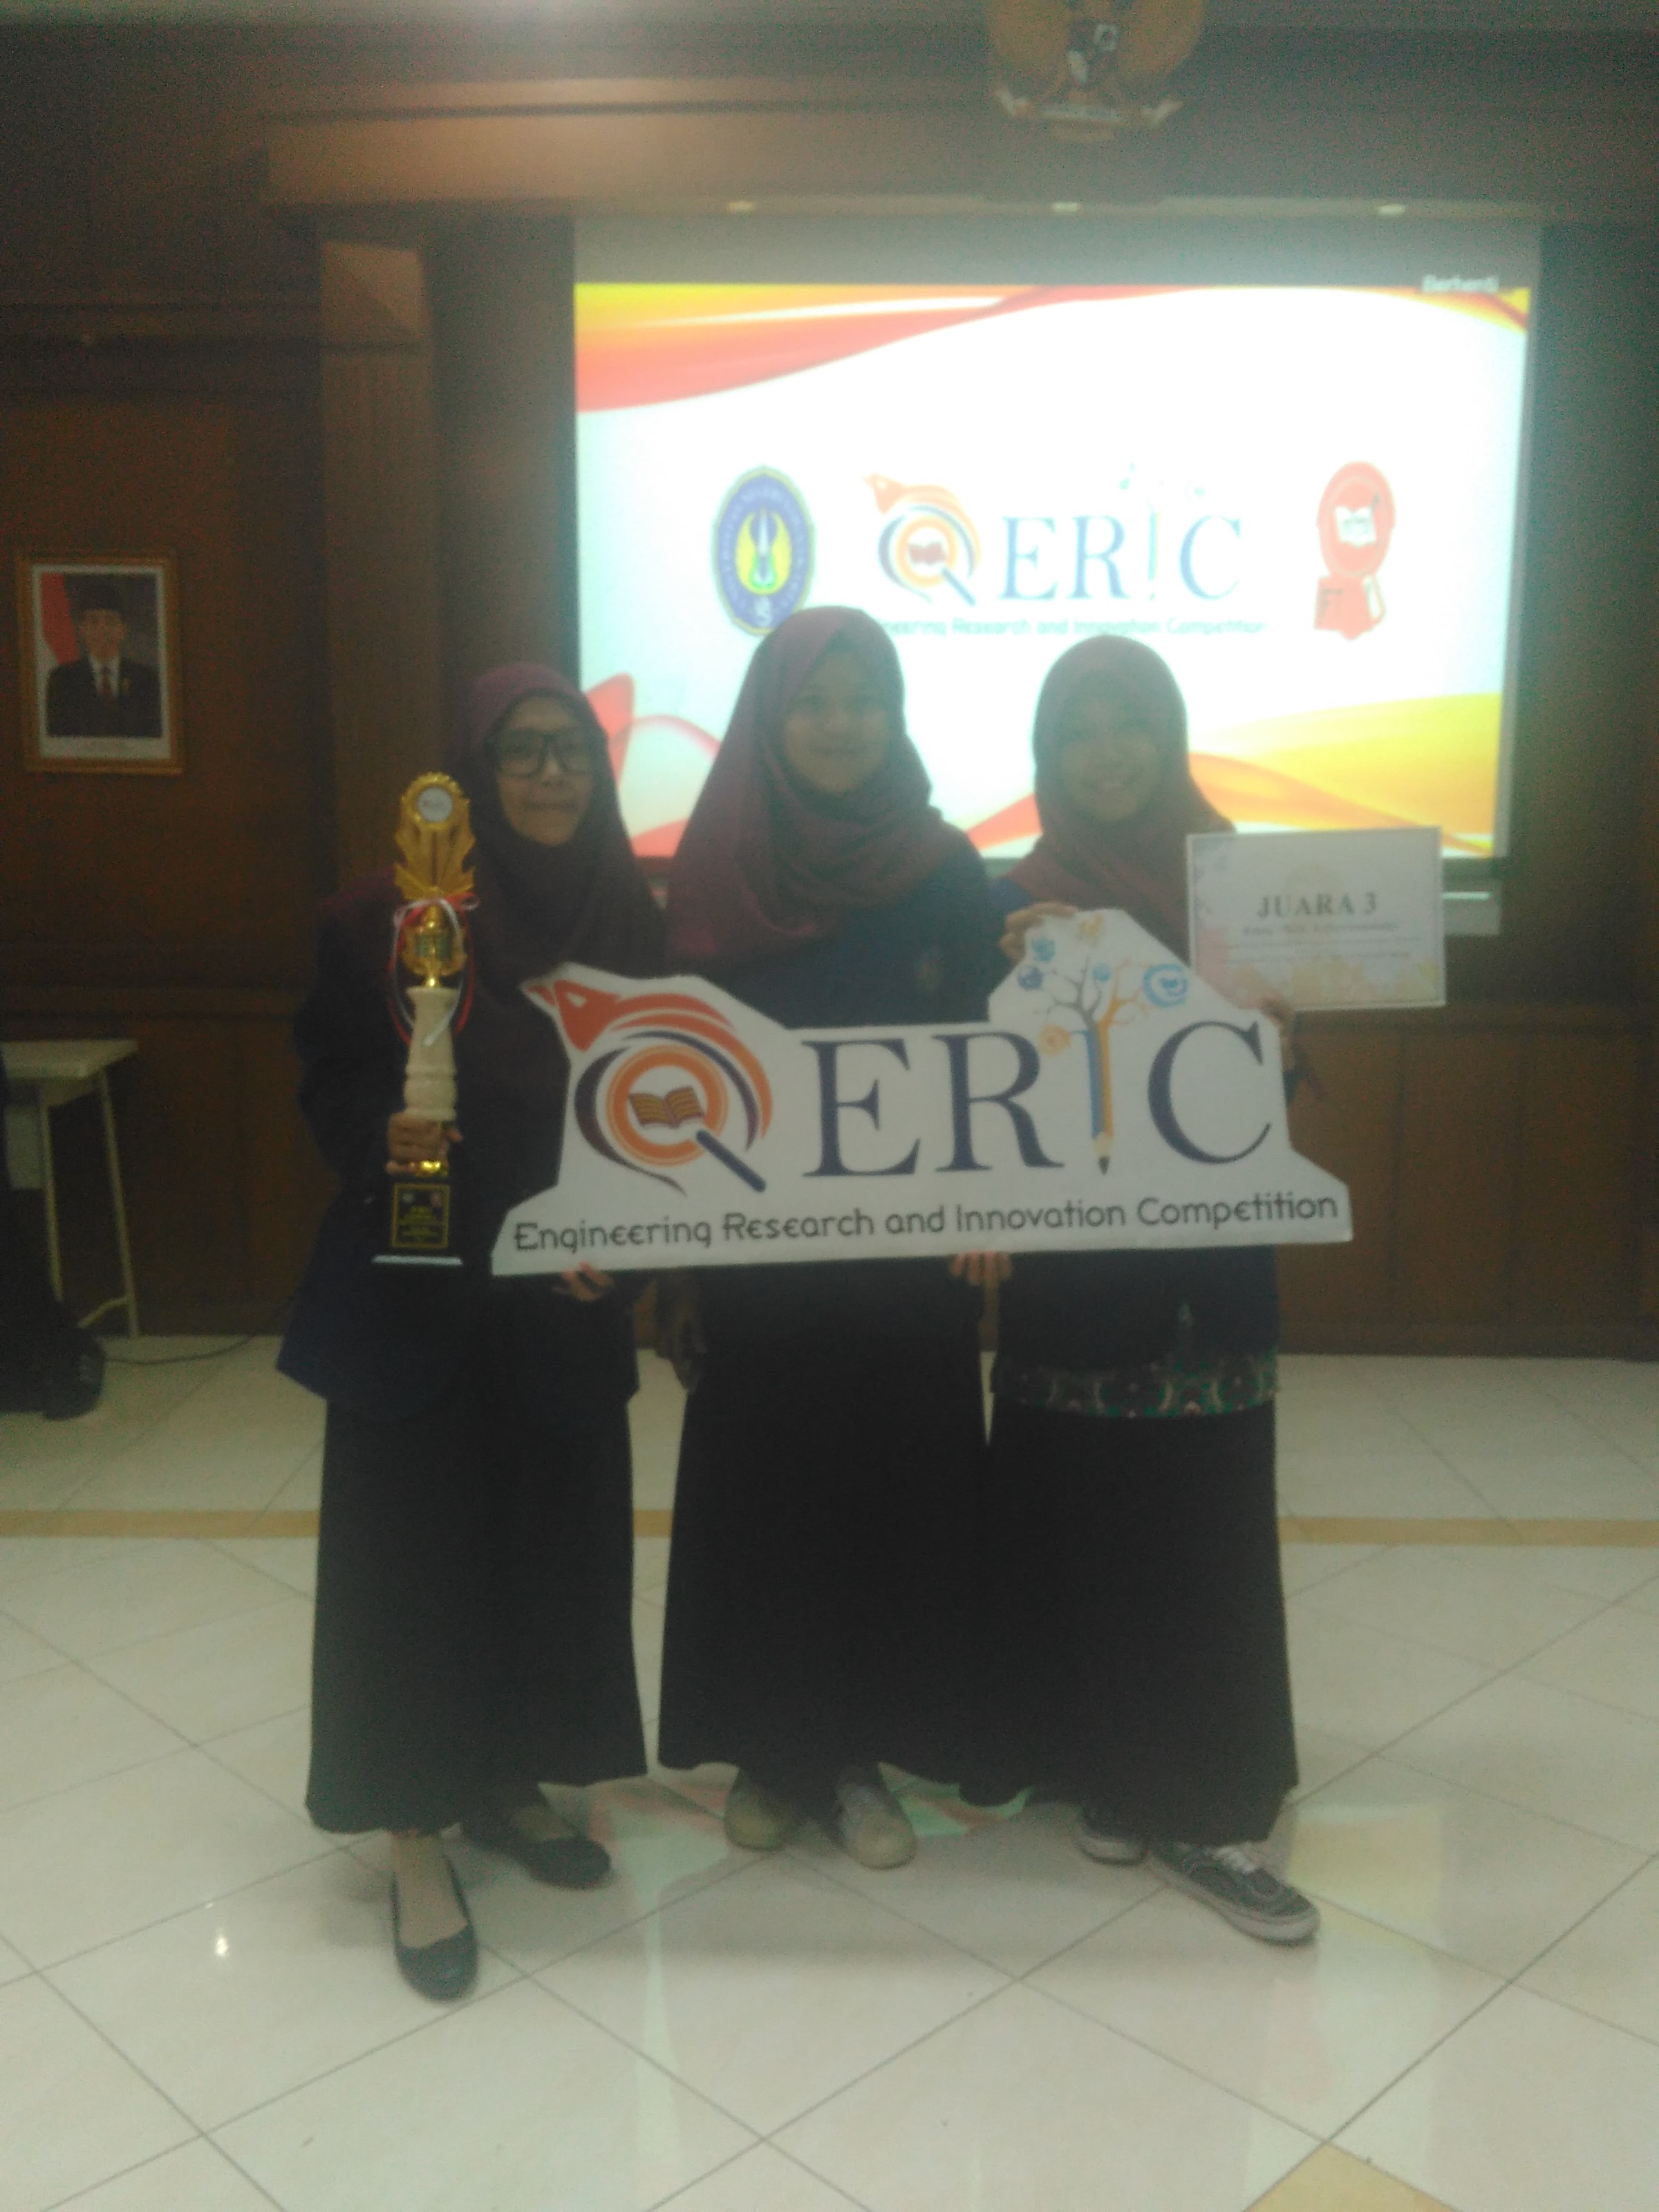 Foto lomba engeneering research and innovation (eric) 2017